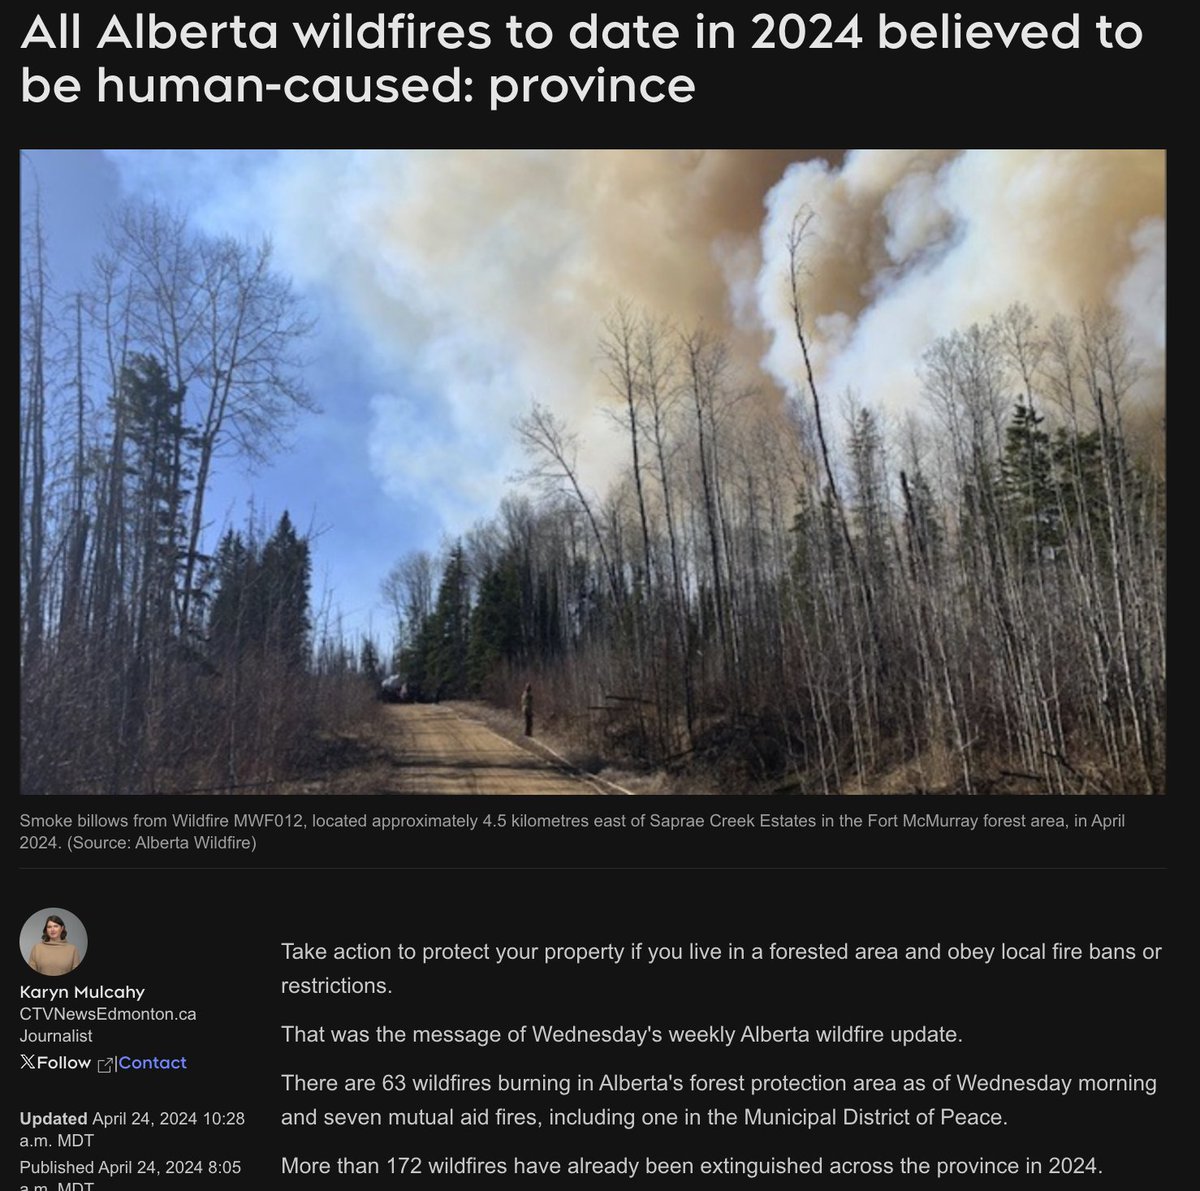 There have been 172 'wildfires' in Alberta in 2024. For those keeping score...

172 of the 'wildfires' were caused by humans.
0 'wildfires' were caused by 'climate change' or CO2.

Enjoy paying your higher Carbon Tax everyone! 🤦‍♂️